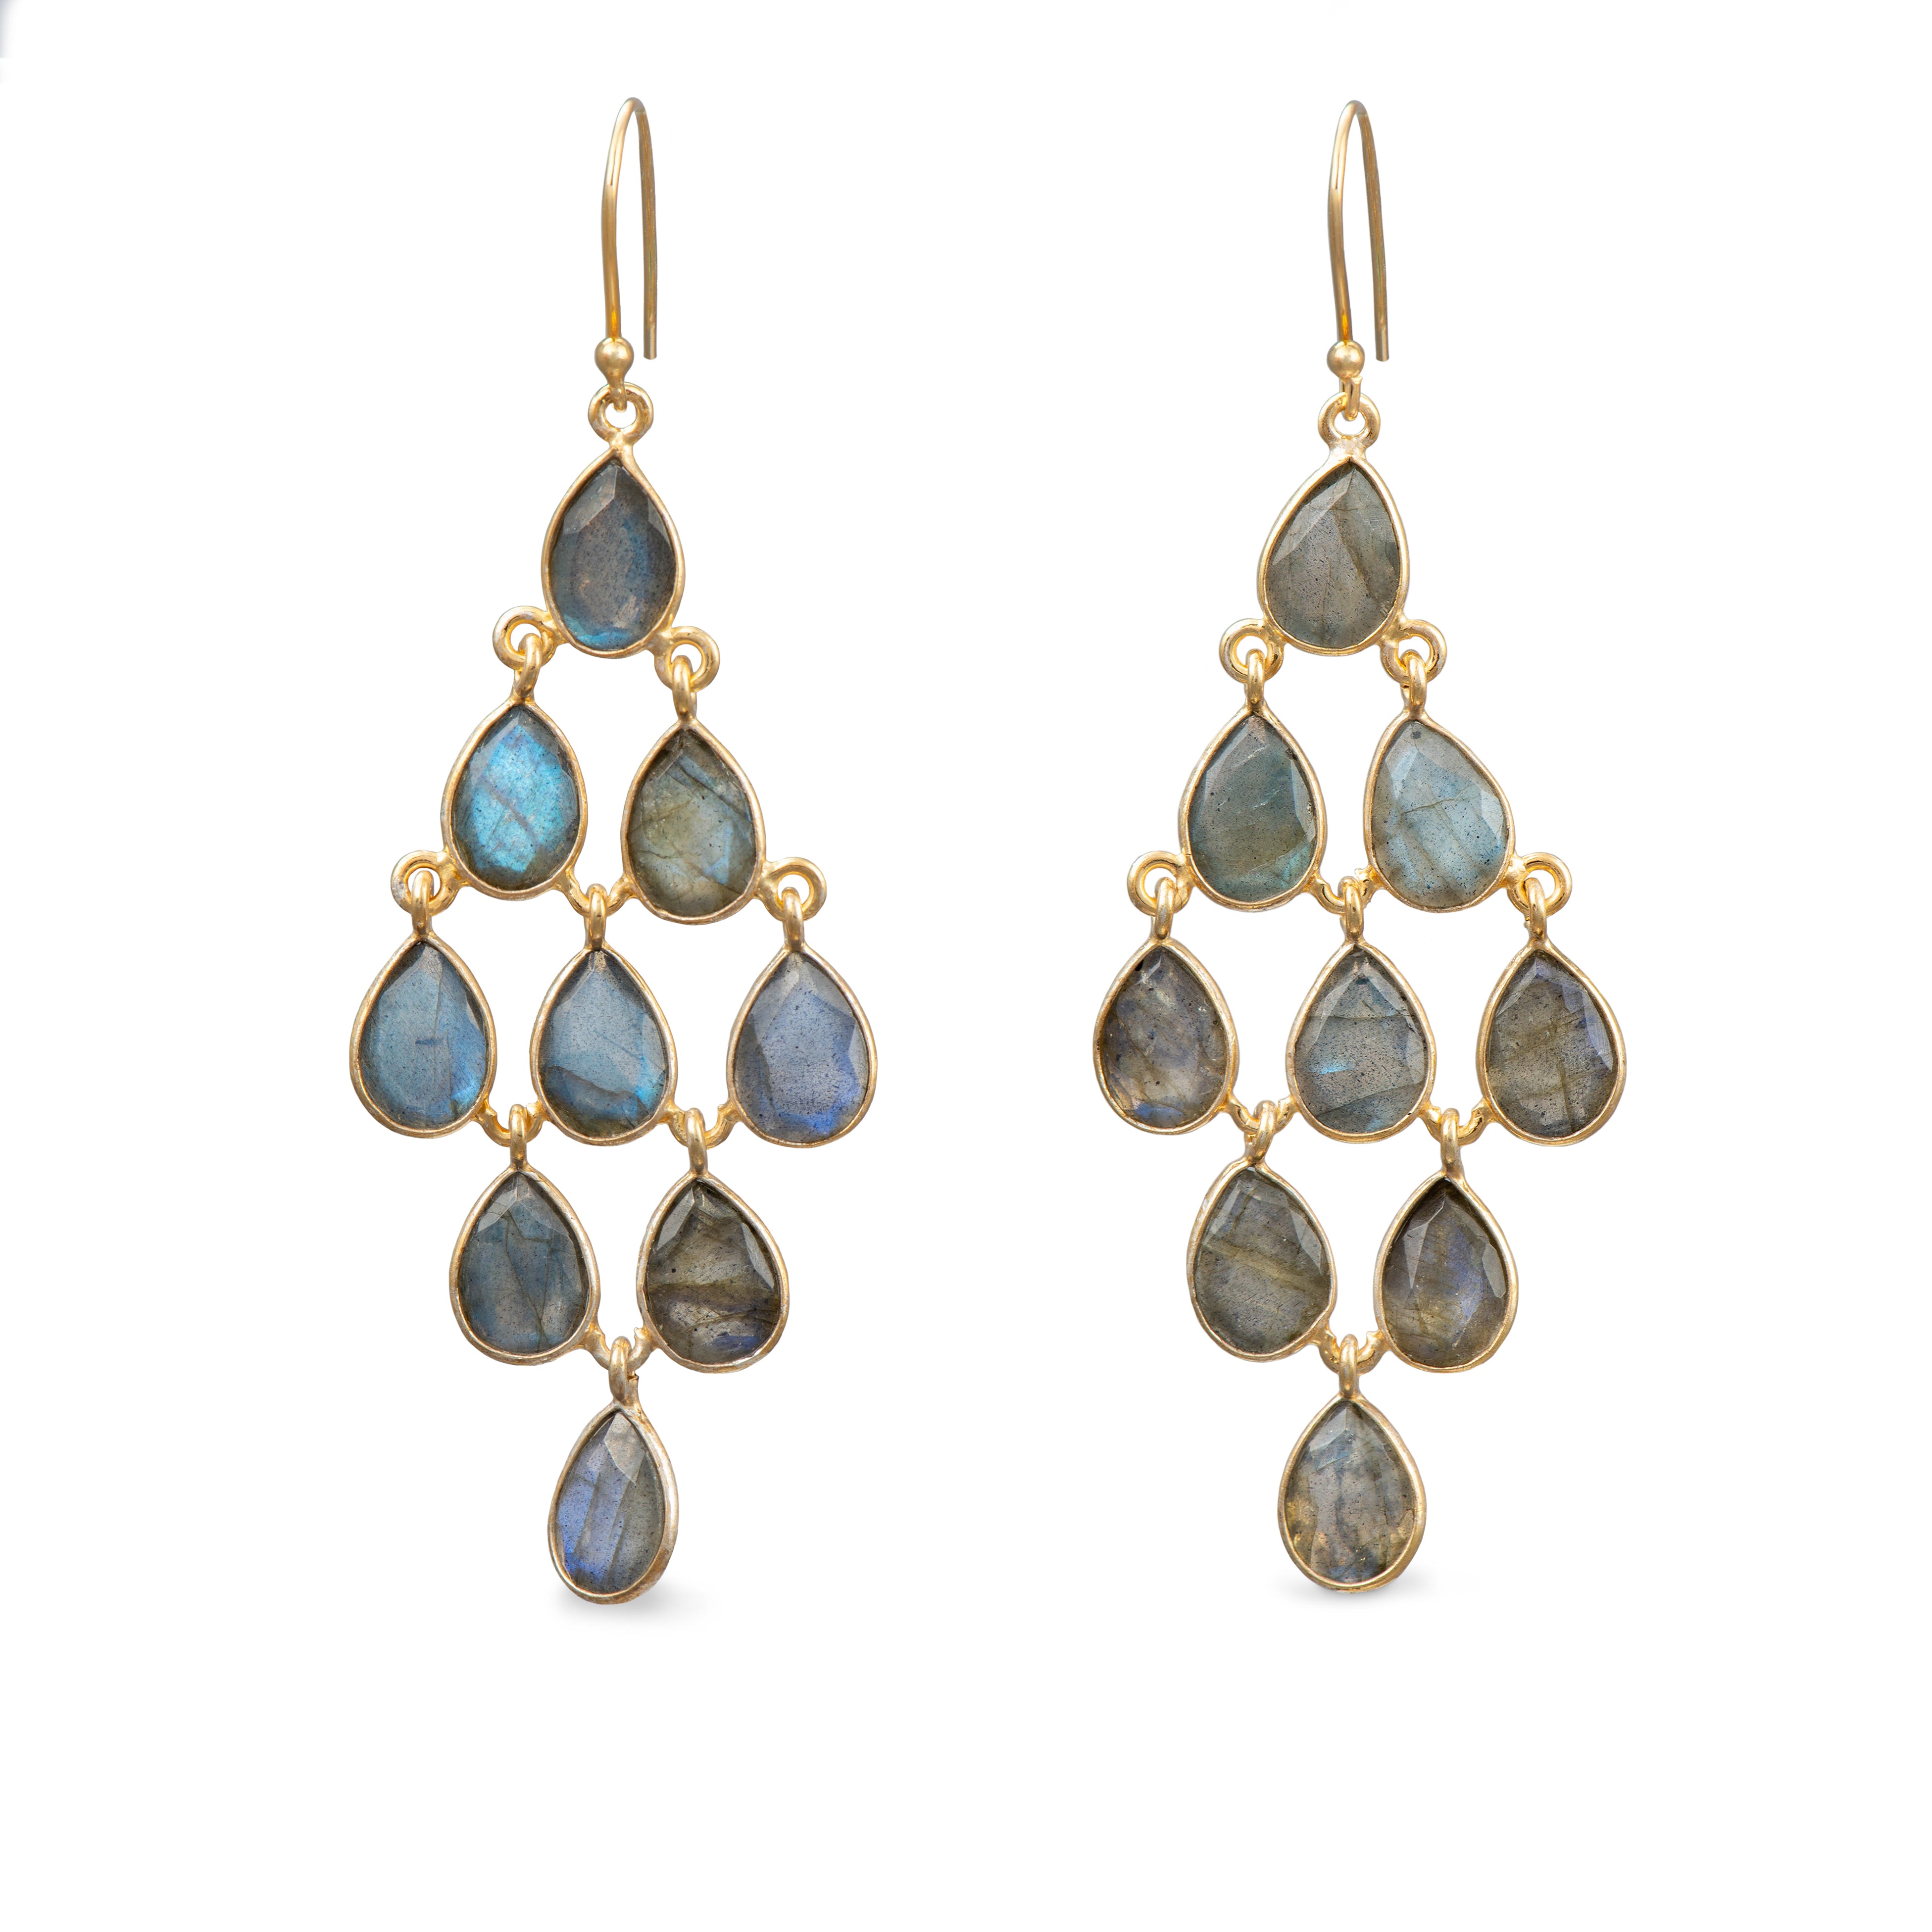 Gold Plated Sterling Silver Chandelier Earrings with Natural Gemstones  - Labradorite